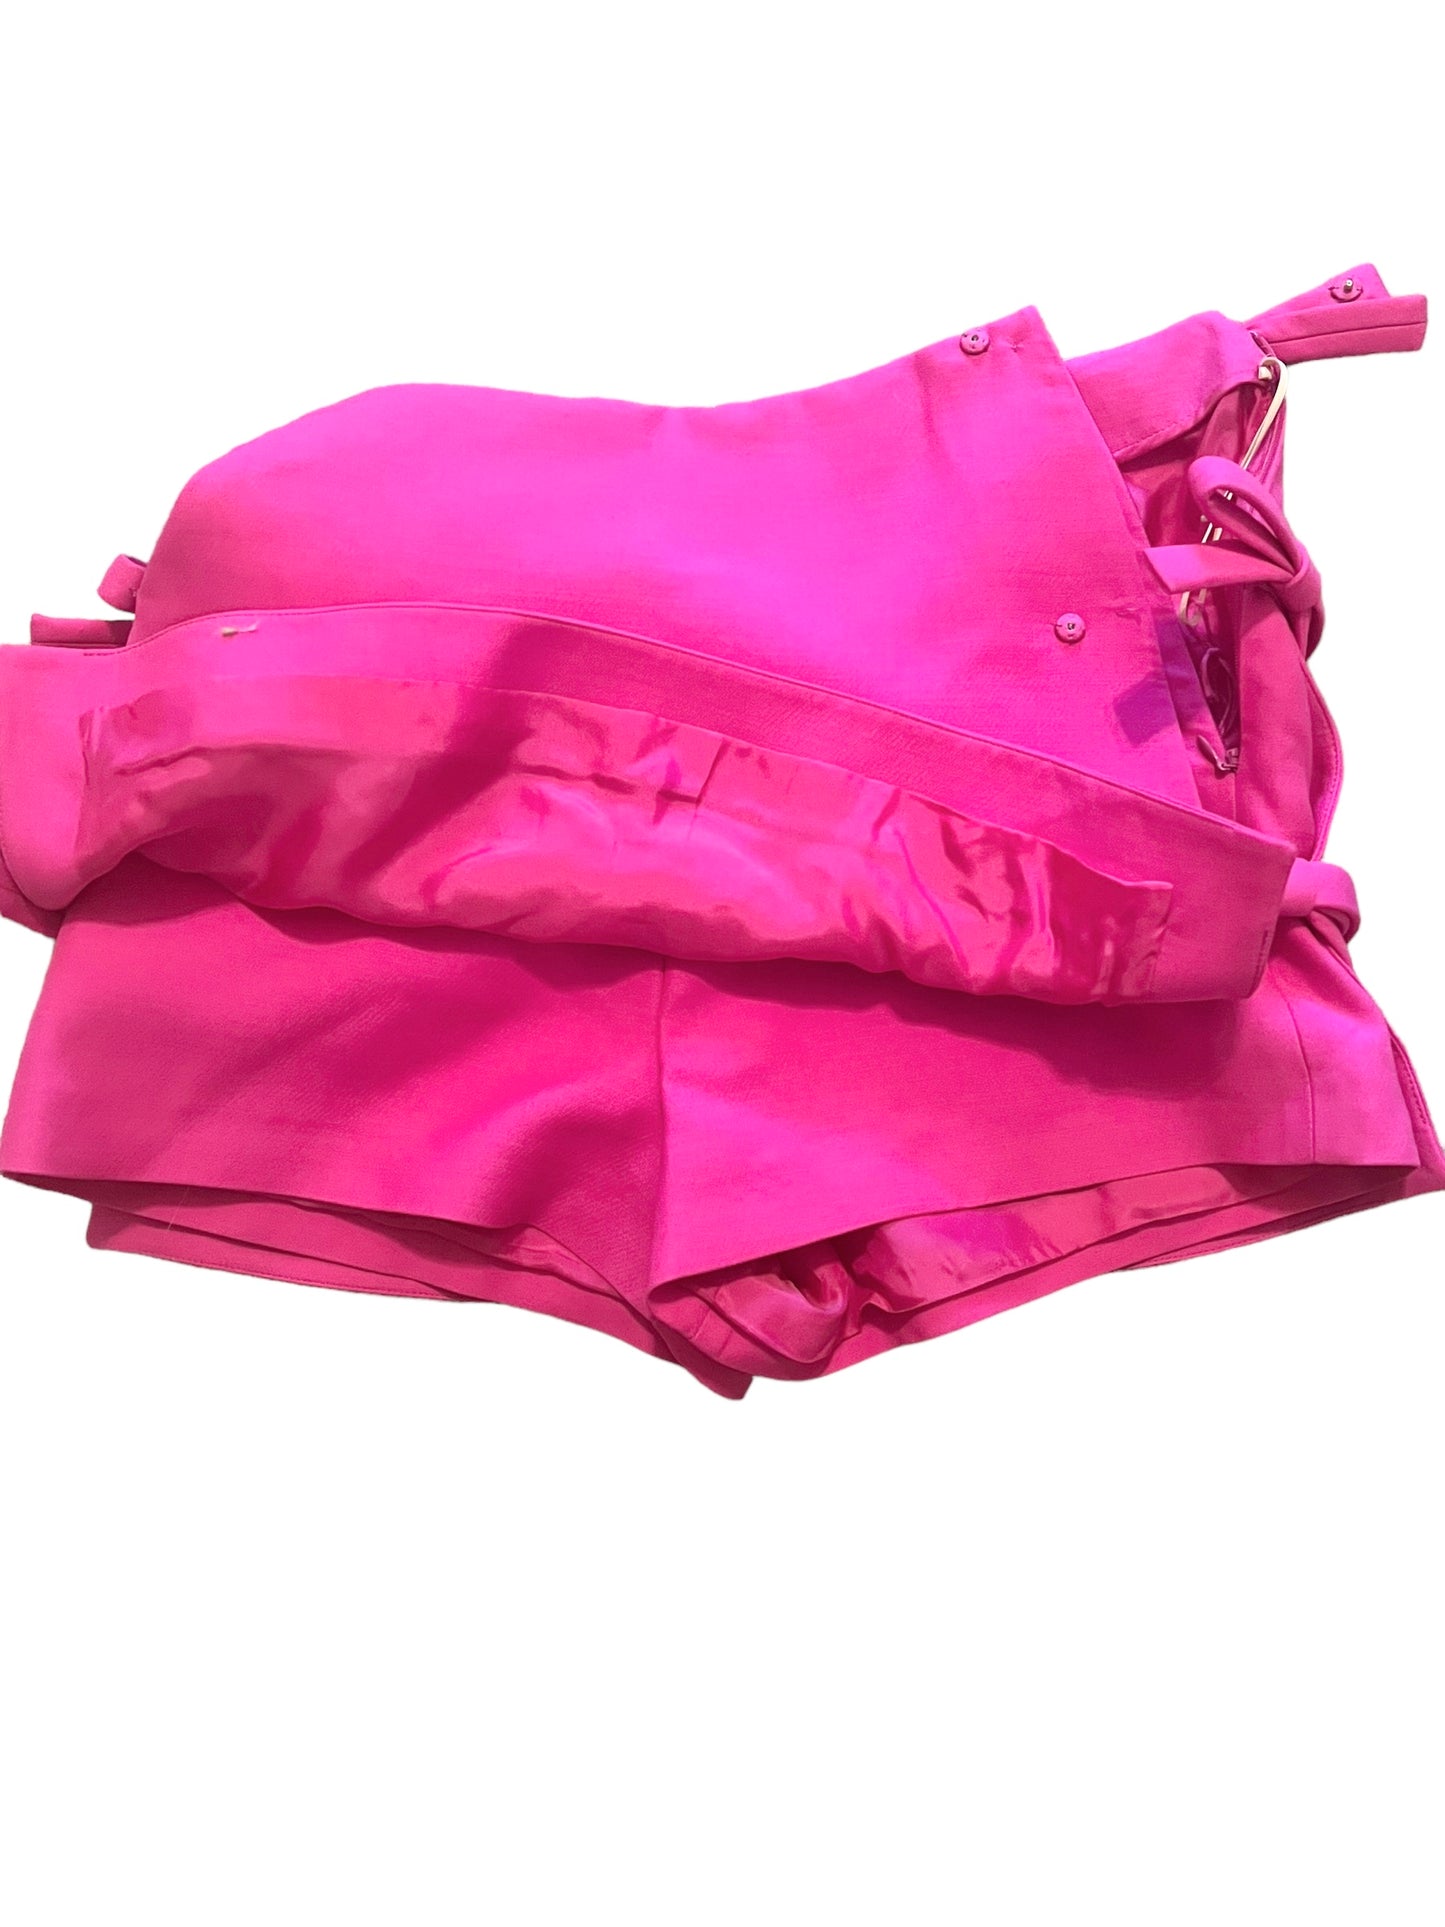 Valentino Size 38 Pink PP by Valentino Crepe Couture Bow Skort